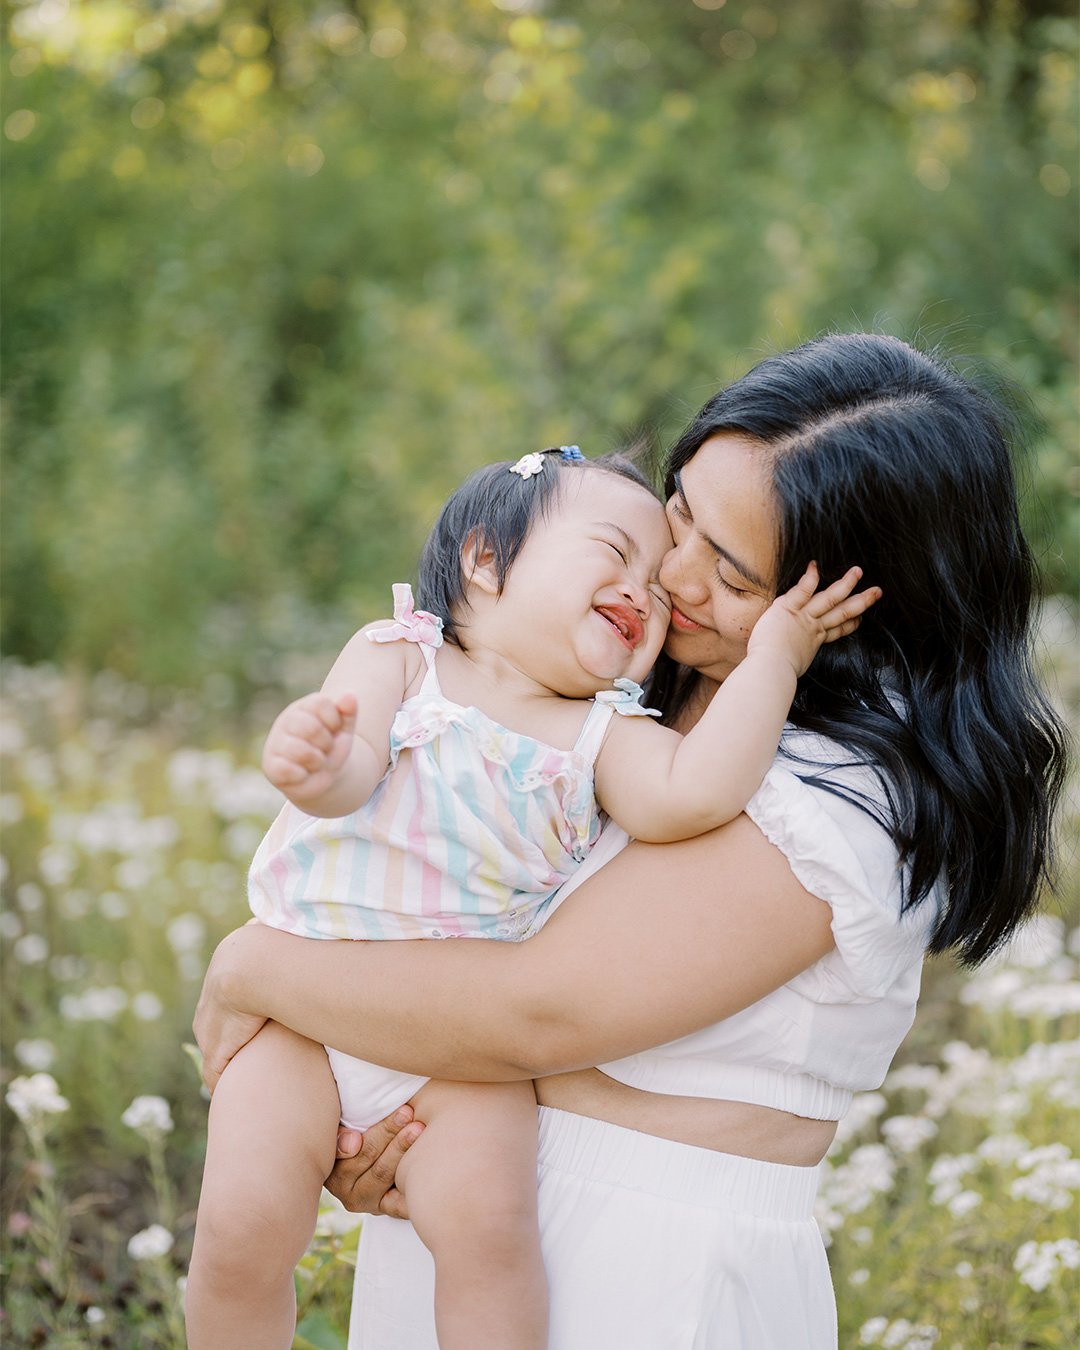 A mamas girl 🎀

20% off petite blossom sessions this week only and one more spot for my floral studio sessions 🌸
.
.
.
.
.
#mommyandme #motherhood #simplymothers #motherhoodunplugged #feelingmotherhood #celebratemom #momentswithmom #motherhoodjourn